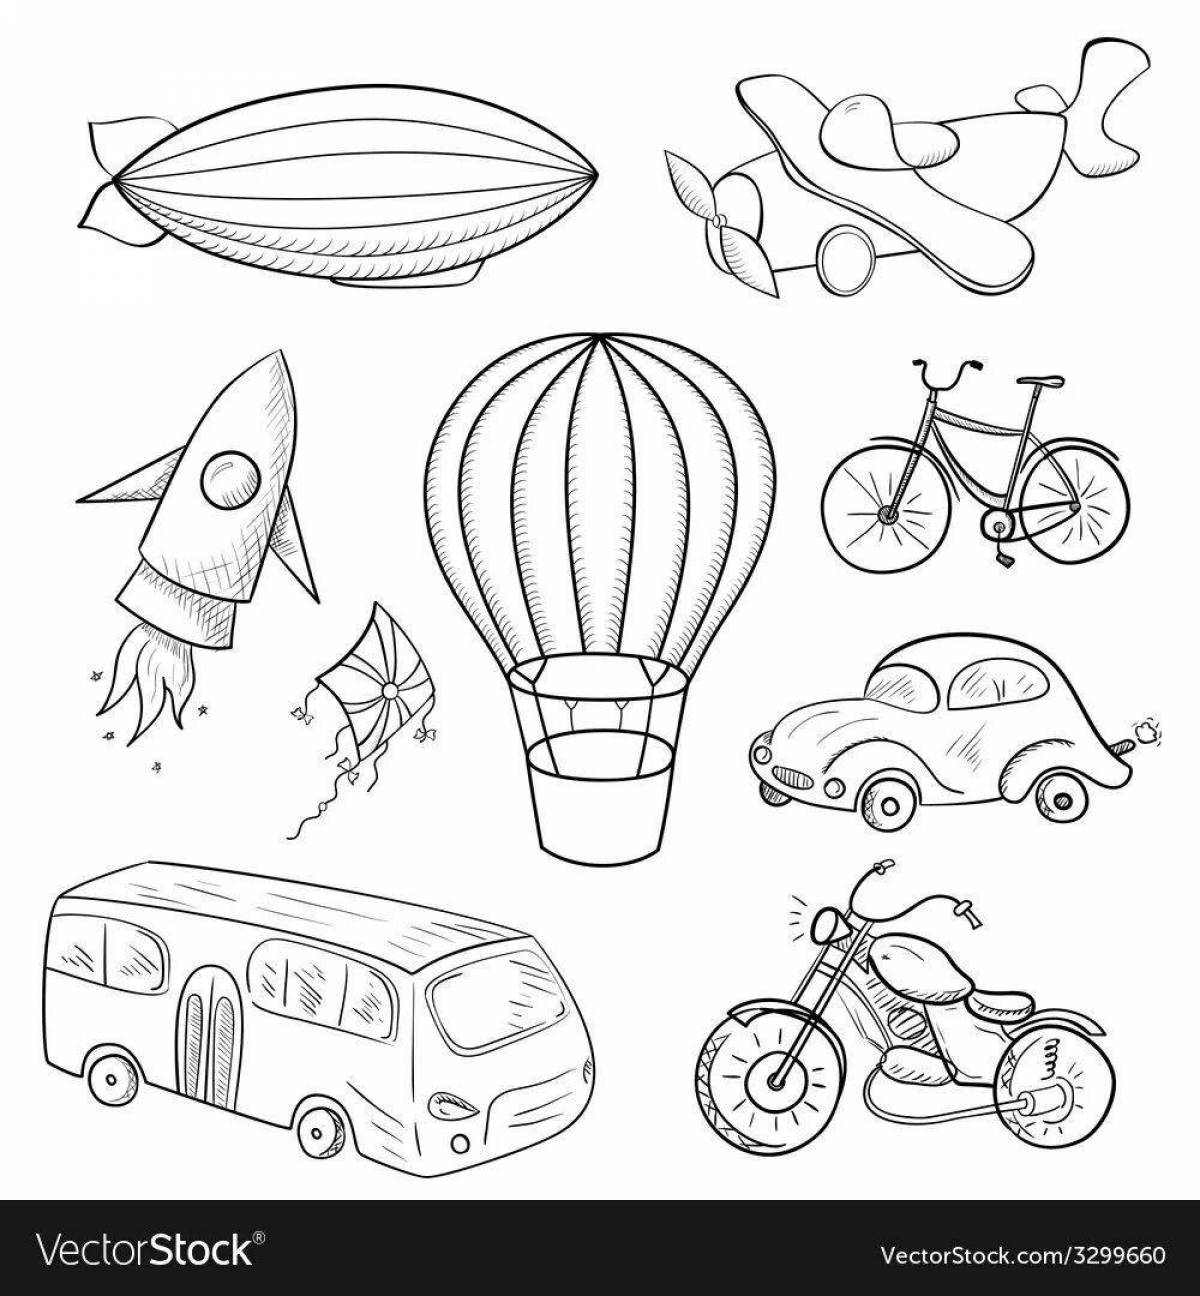 Glorious air transport coloring page